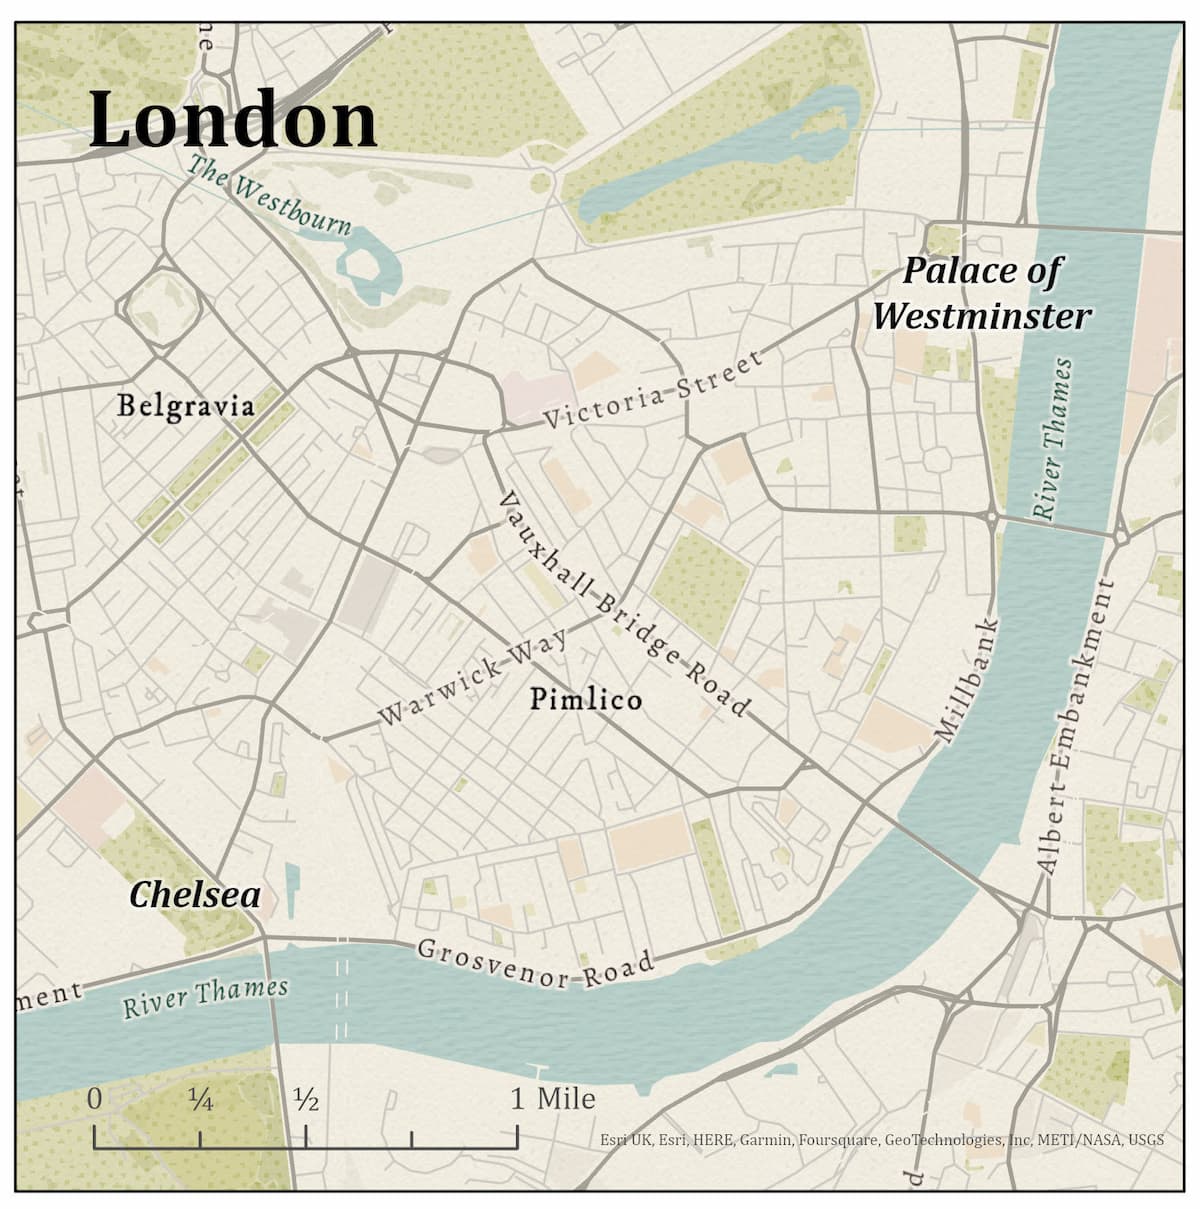 The Route Up the Thames (map by K. Buja)